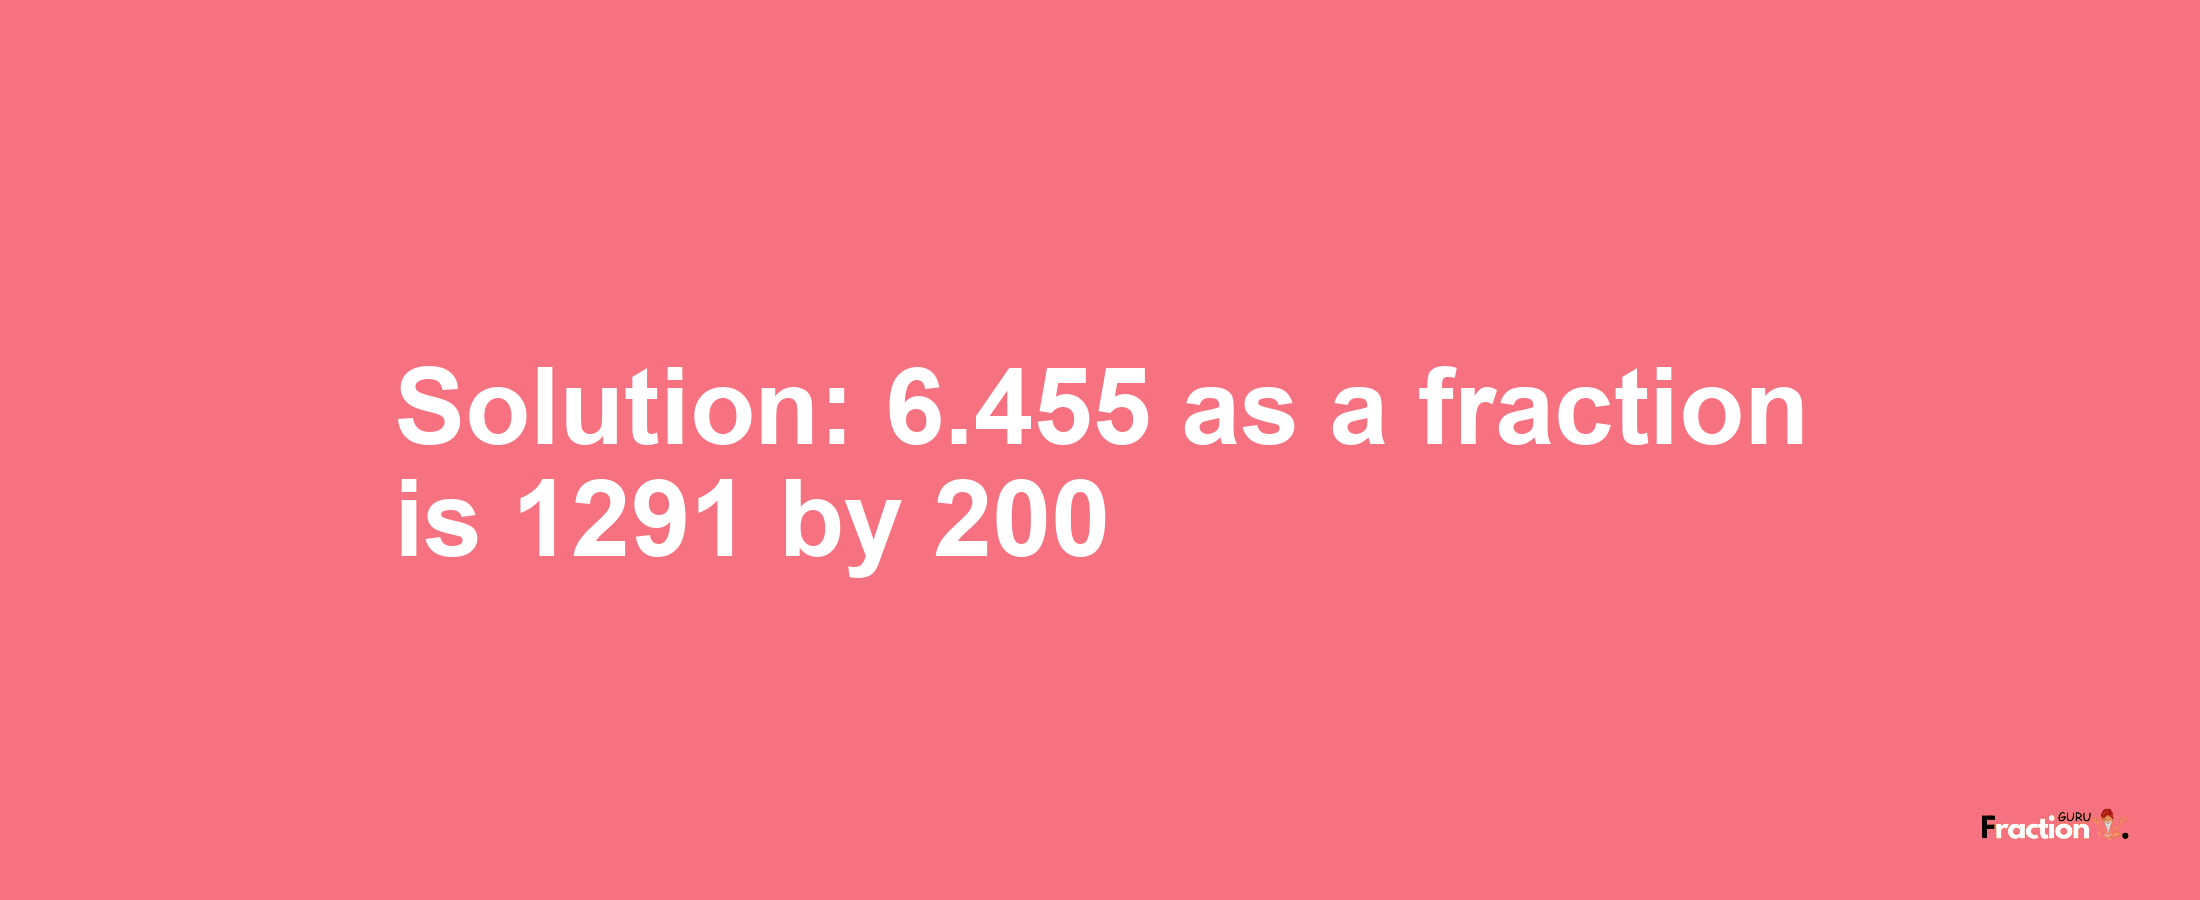 Solution:6.455 as a fraction is 1291/200